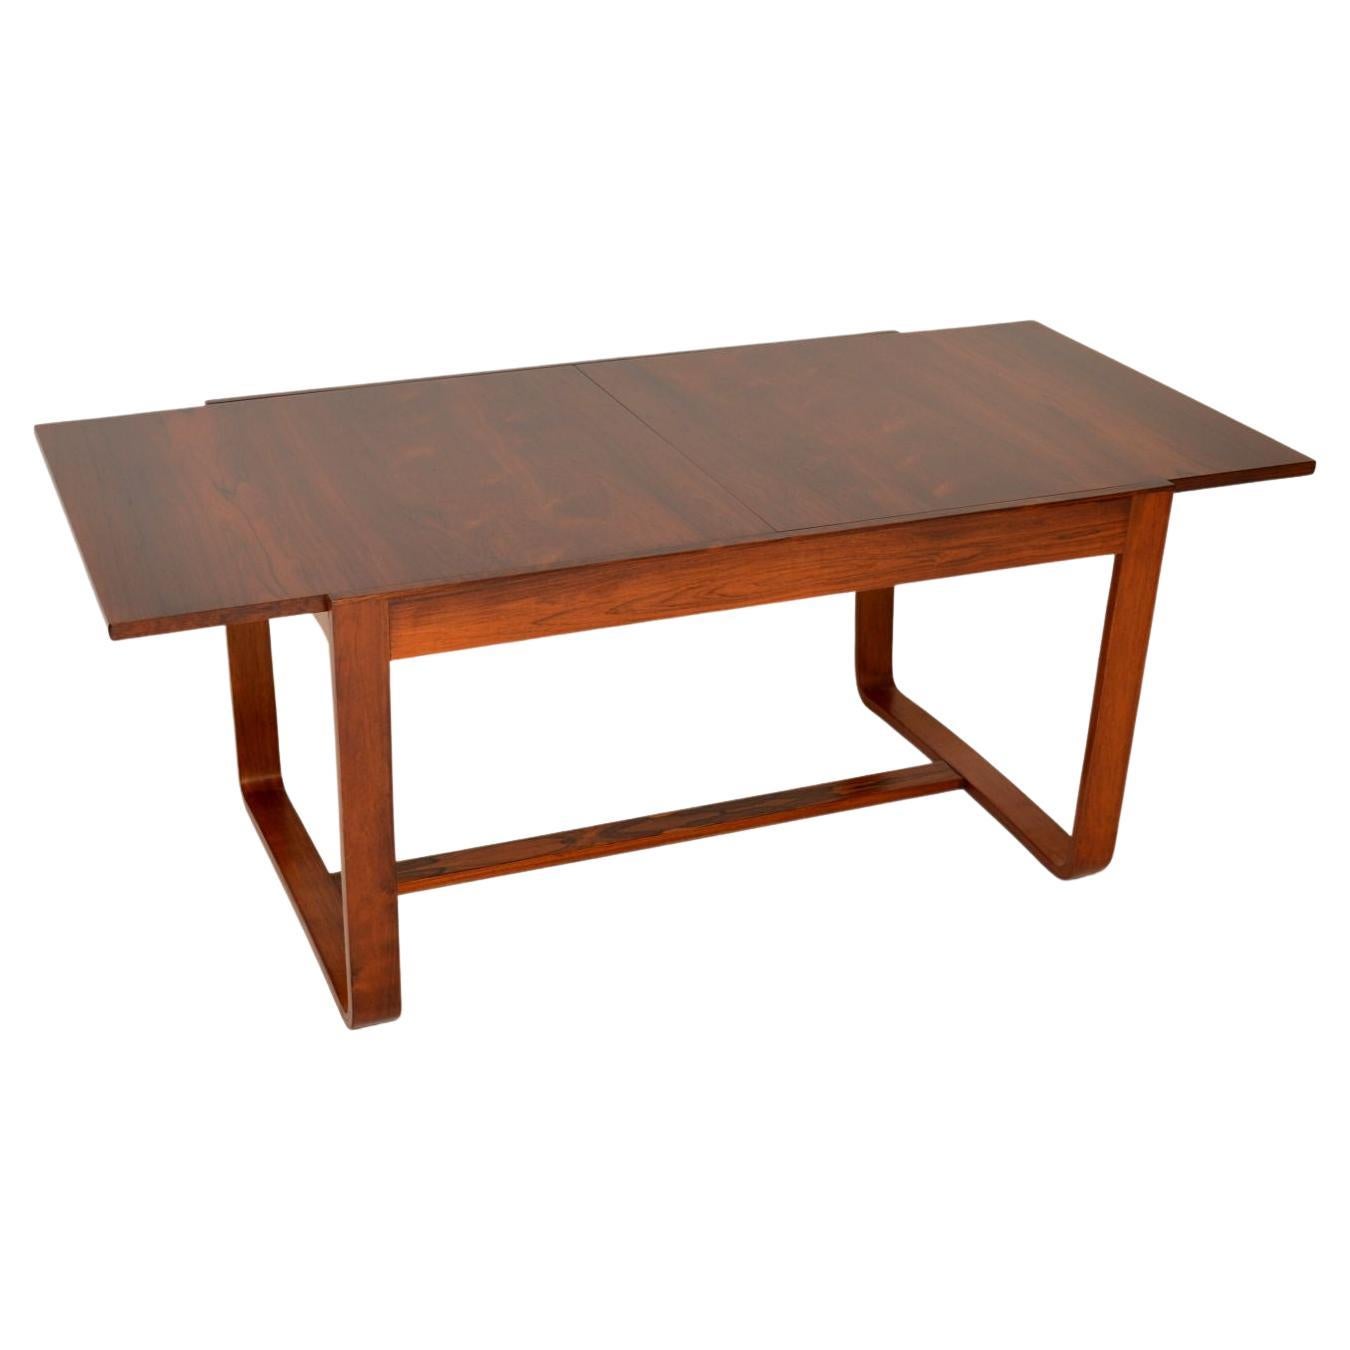 1960s Vintage Dining Table by Uniflex